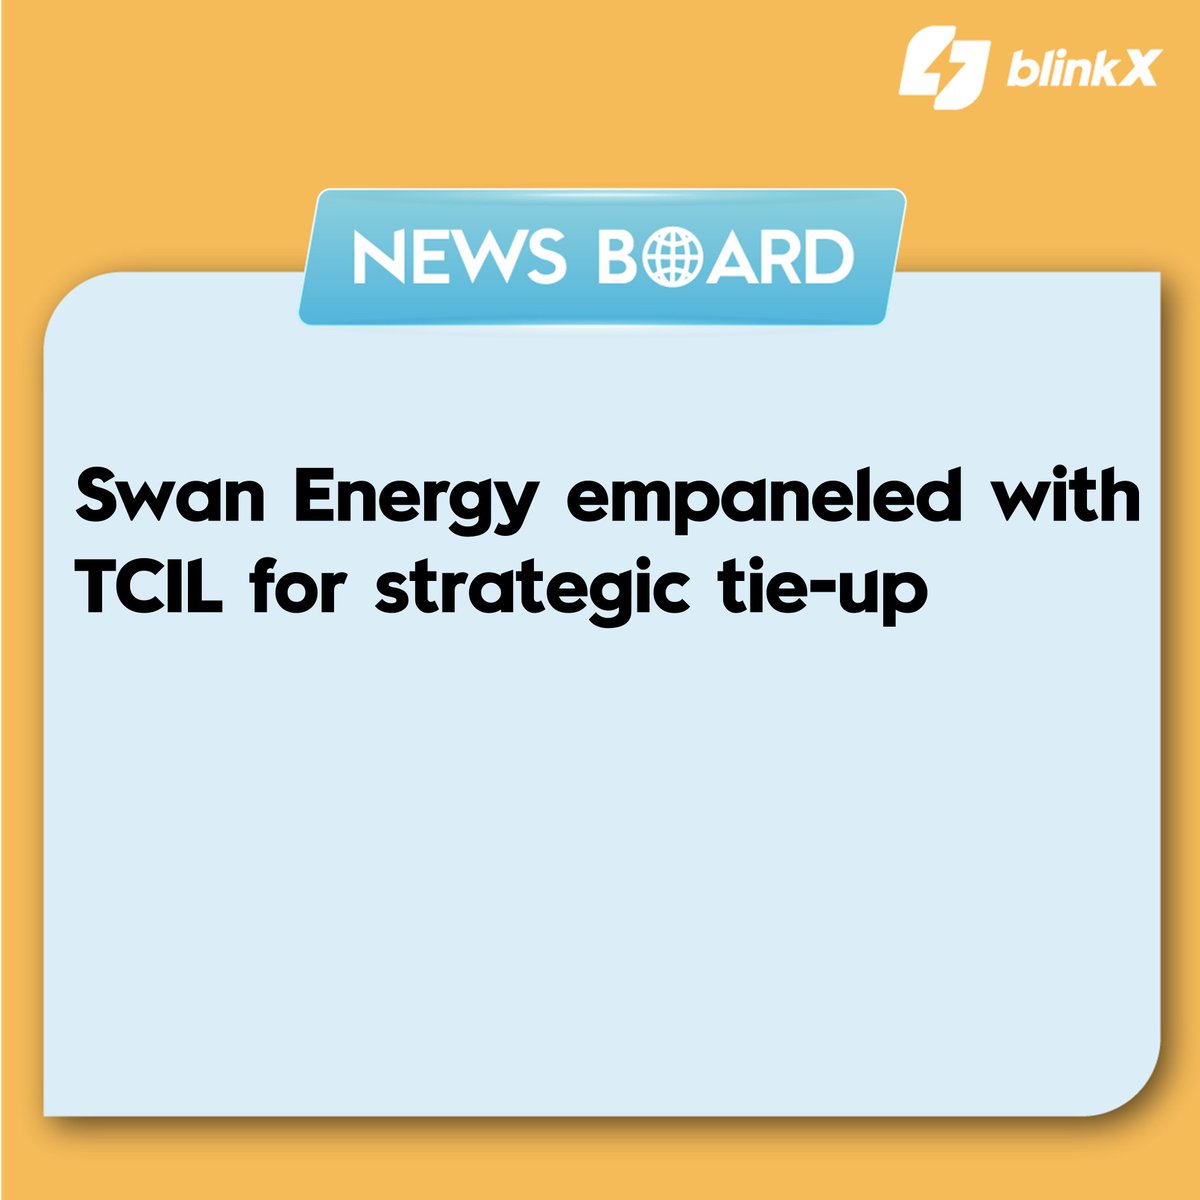 Swan Energy Limited has been empaneled with the Telecommunications Consultants India Limited (A Government of India Enterprise) for a strategic tie-up.

#SwanEnergy #TCIL #communications #tieup
#partnership #company #rupee #launch #news #finance #marketupdates #stocks